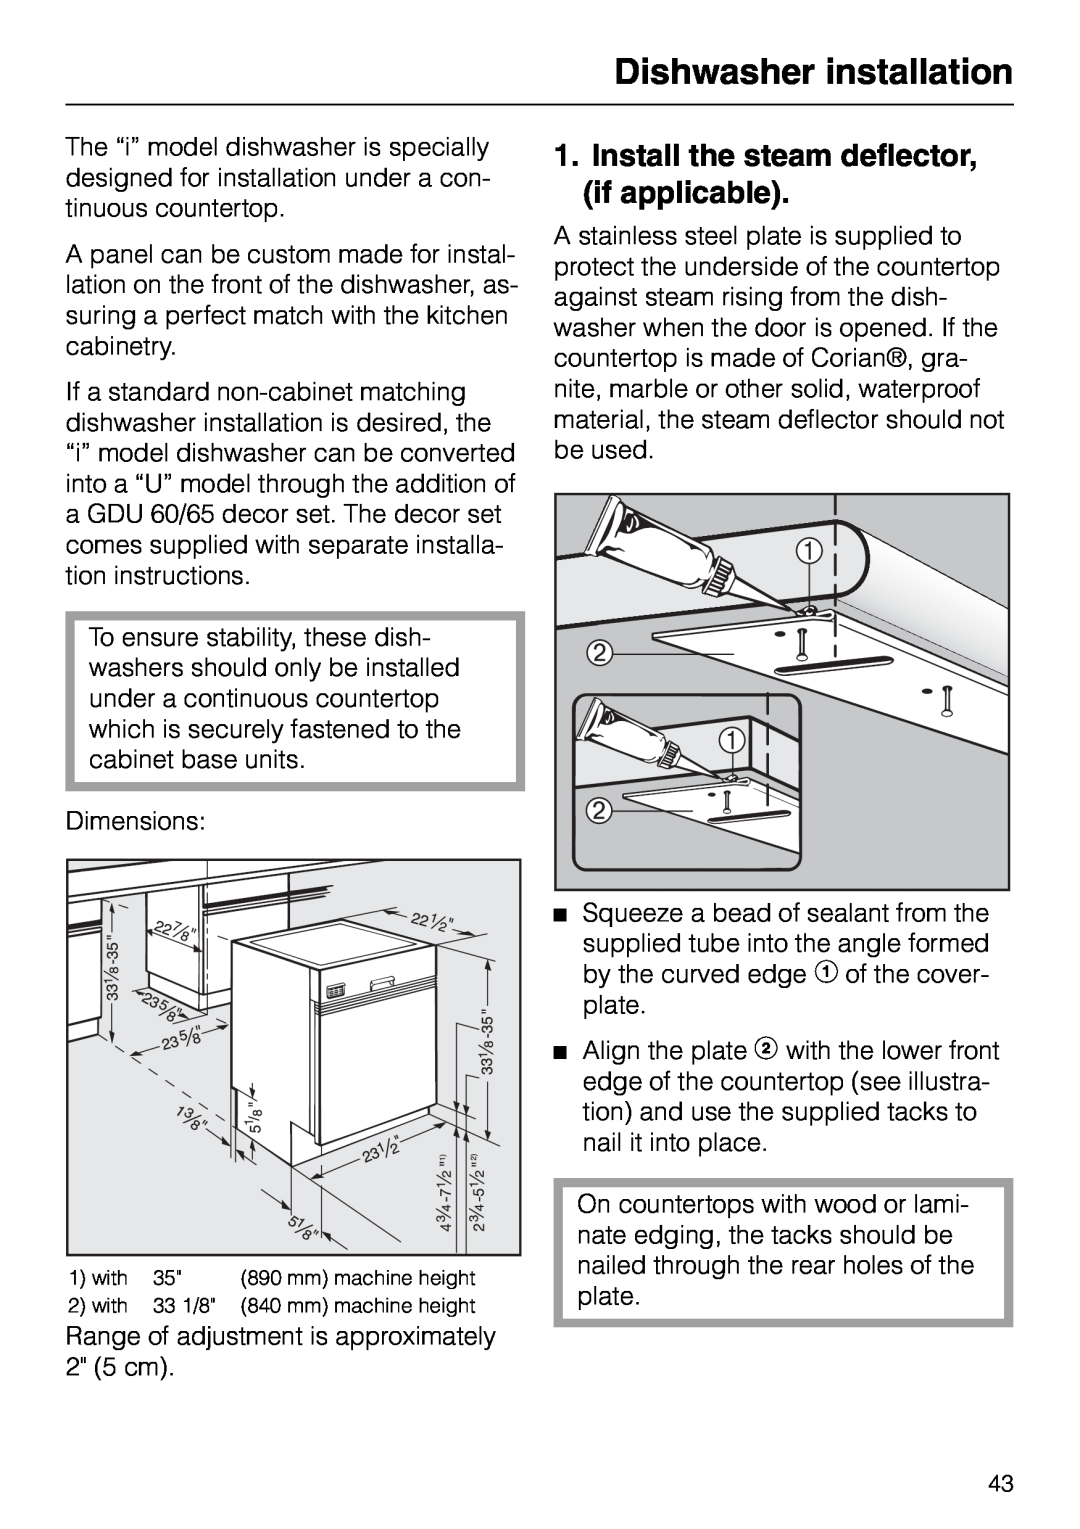 Miele M.-NR. 04 390 922 operating instructions Dishwasher installation, Install the steam deflector, if applicable 